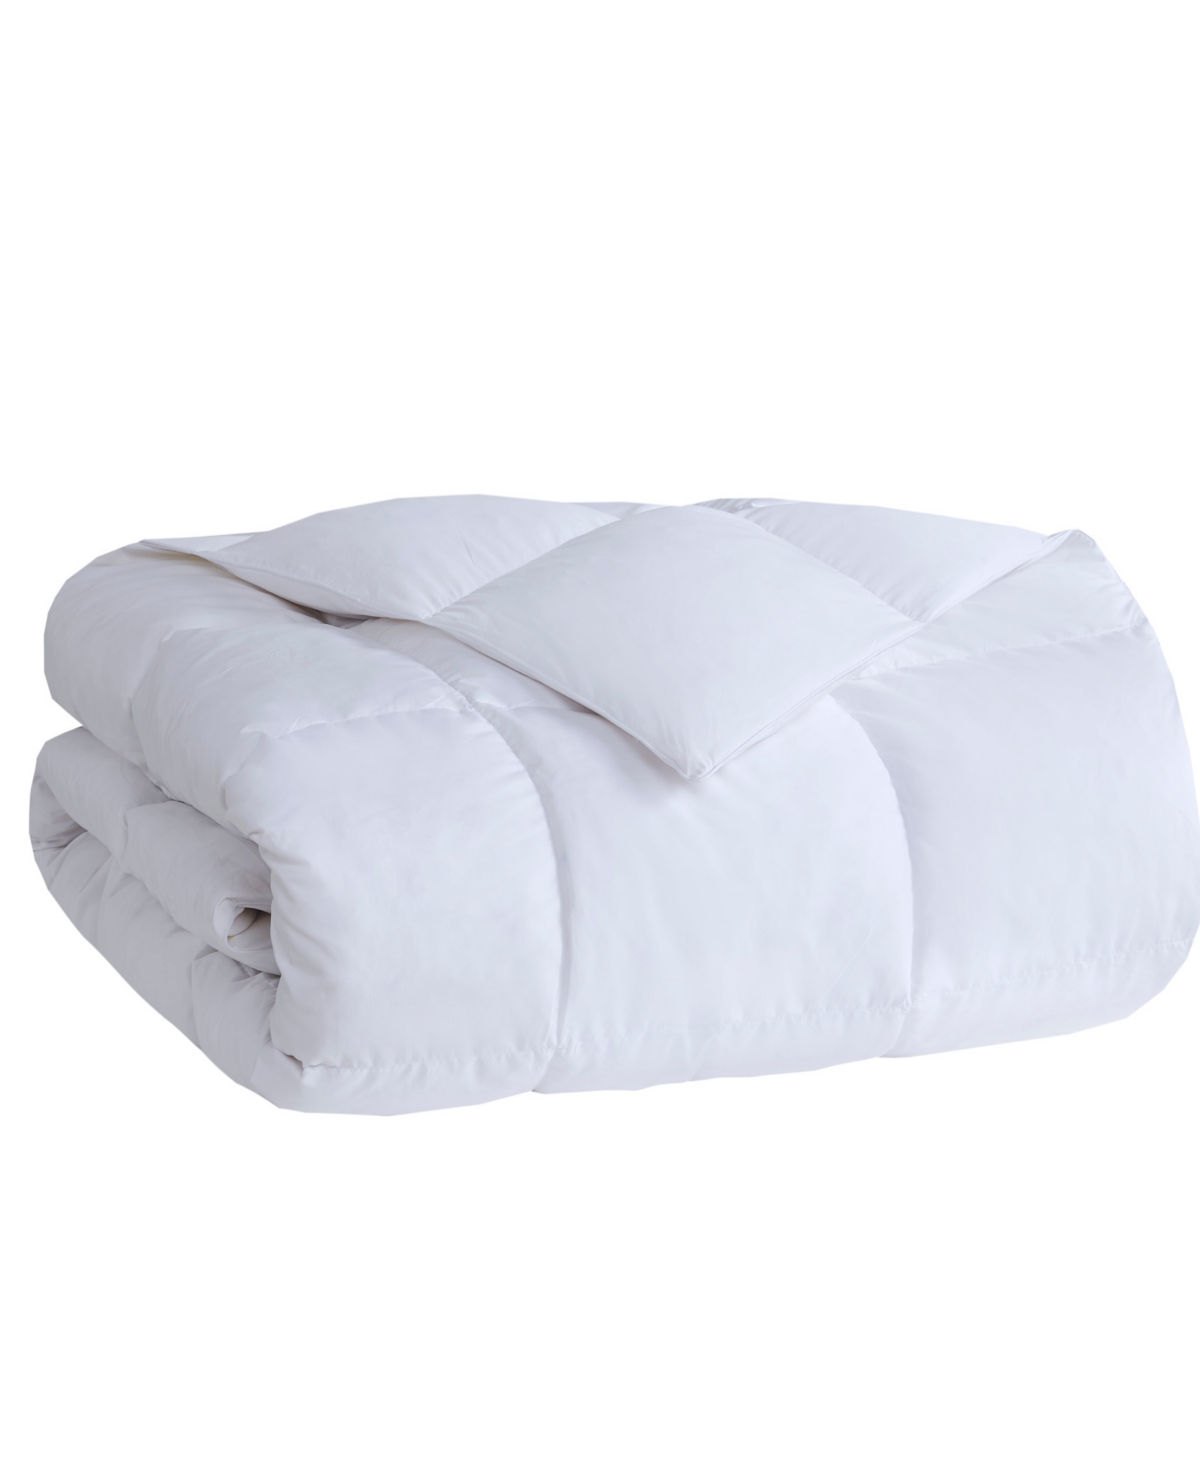 Sleep Philosophy Heavy Warmth Goose Feather & Goose Down Filling Comforter,, Twin/twin Xl In White